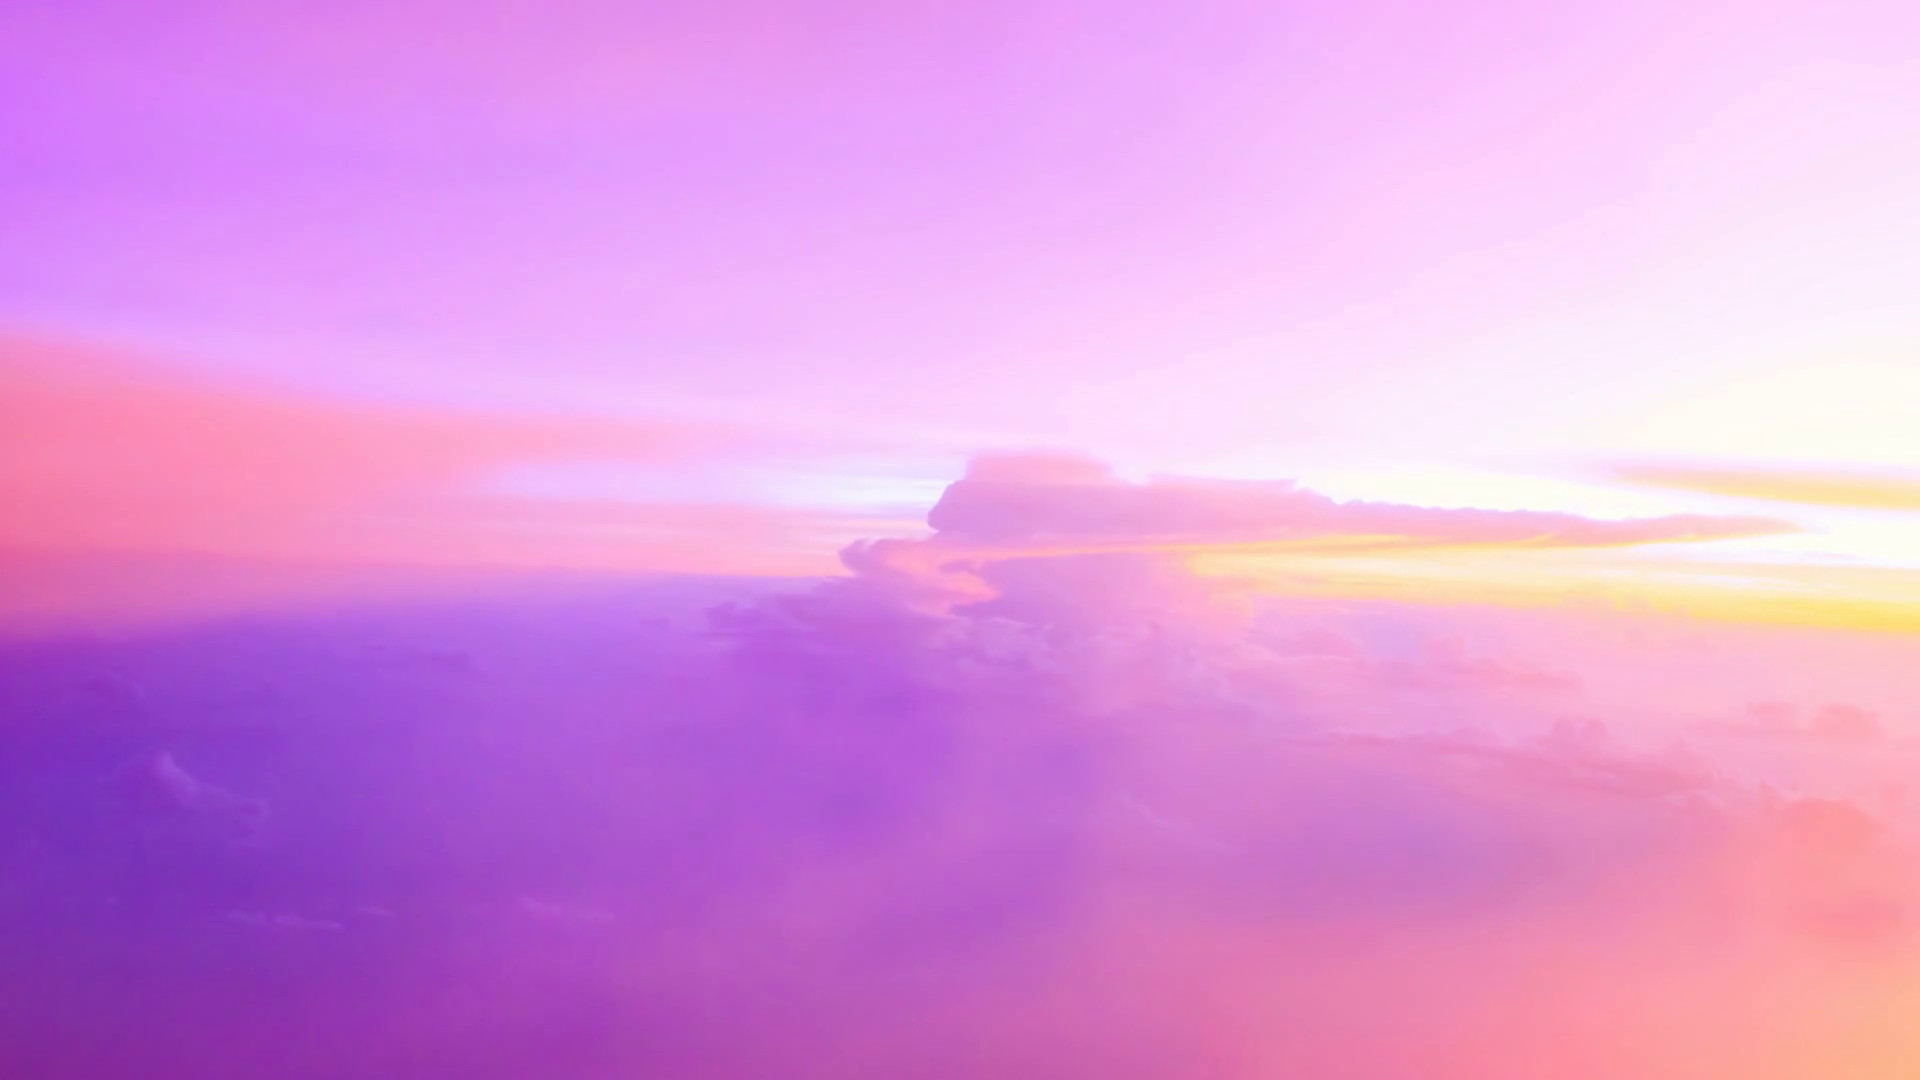 Sunny Sky Pink Sunset Background Beautiful Cloudscape View Over Clouds Freedom Concept 1920x1080